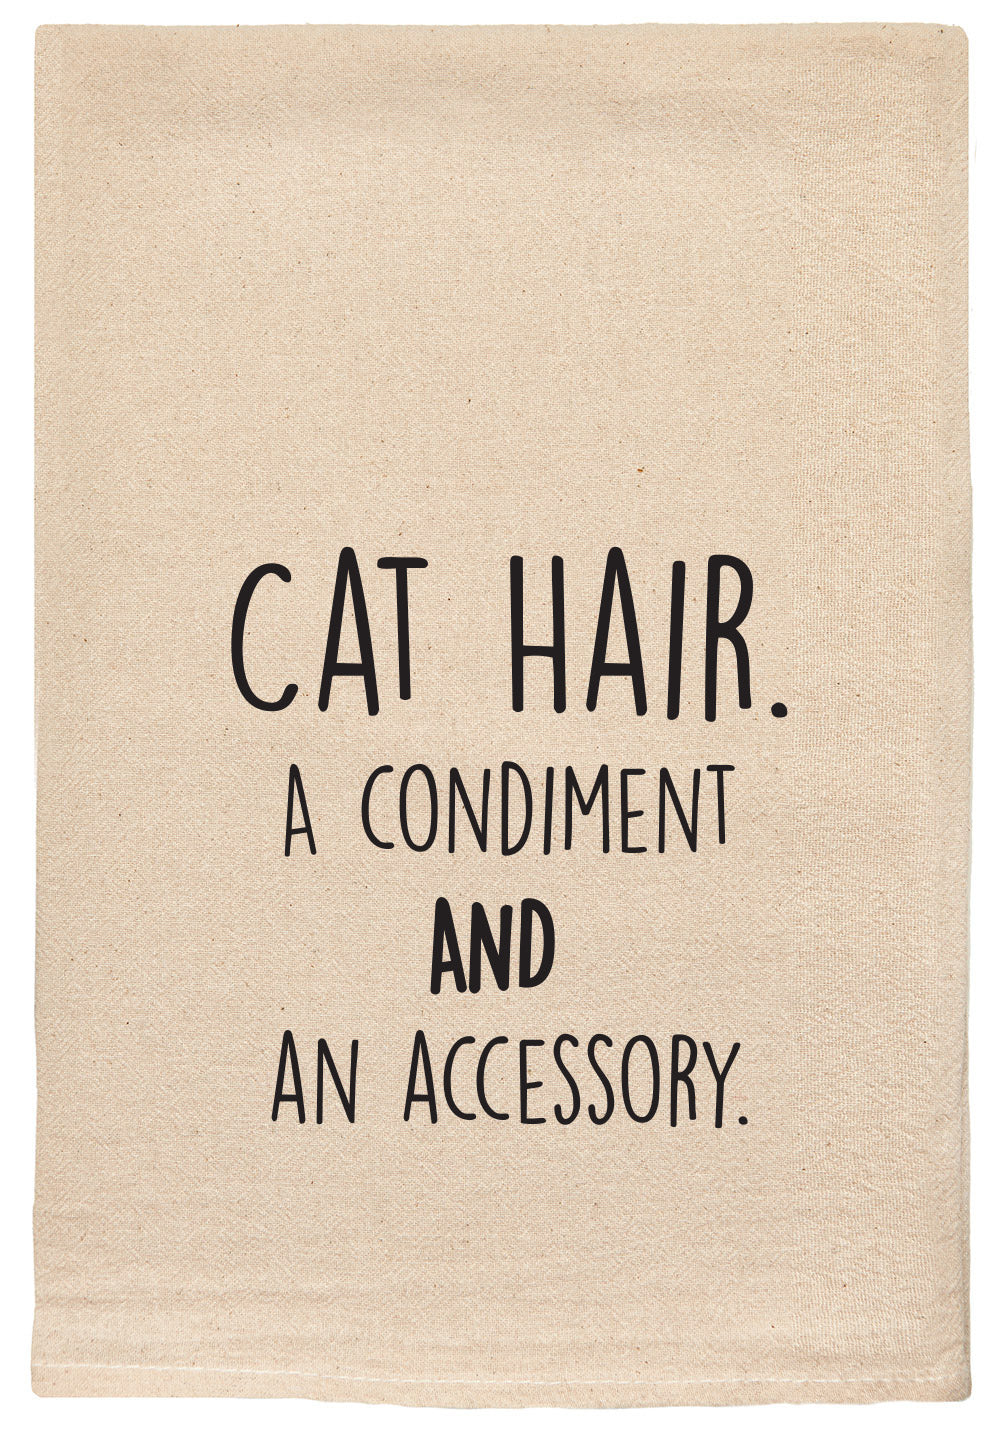 cat hair. a condiment and an accessory.